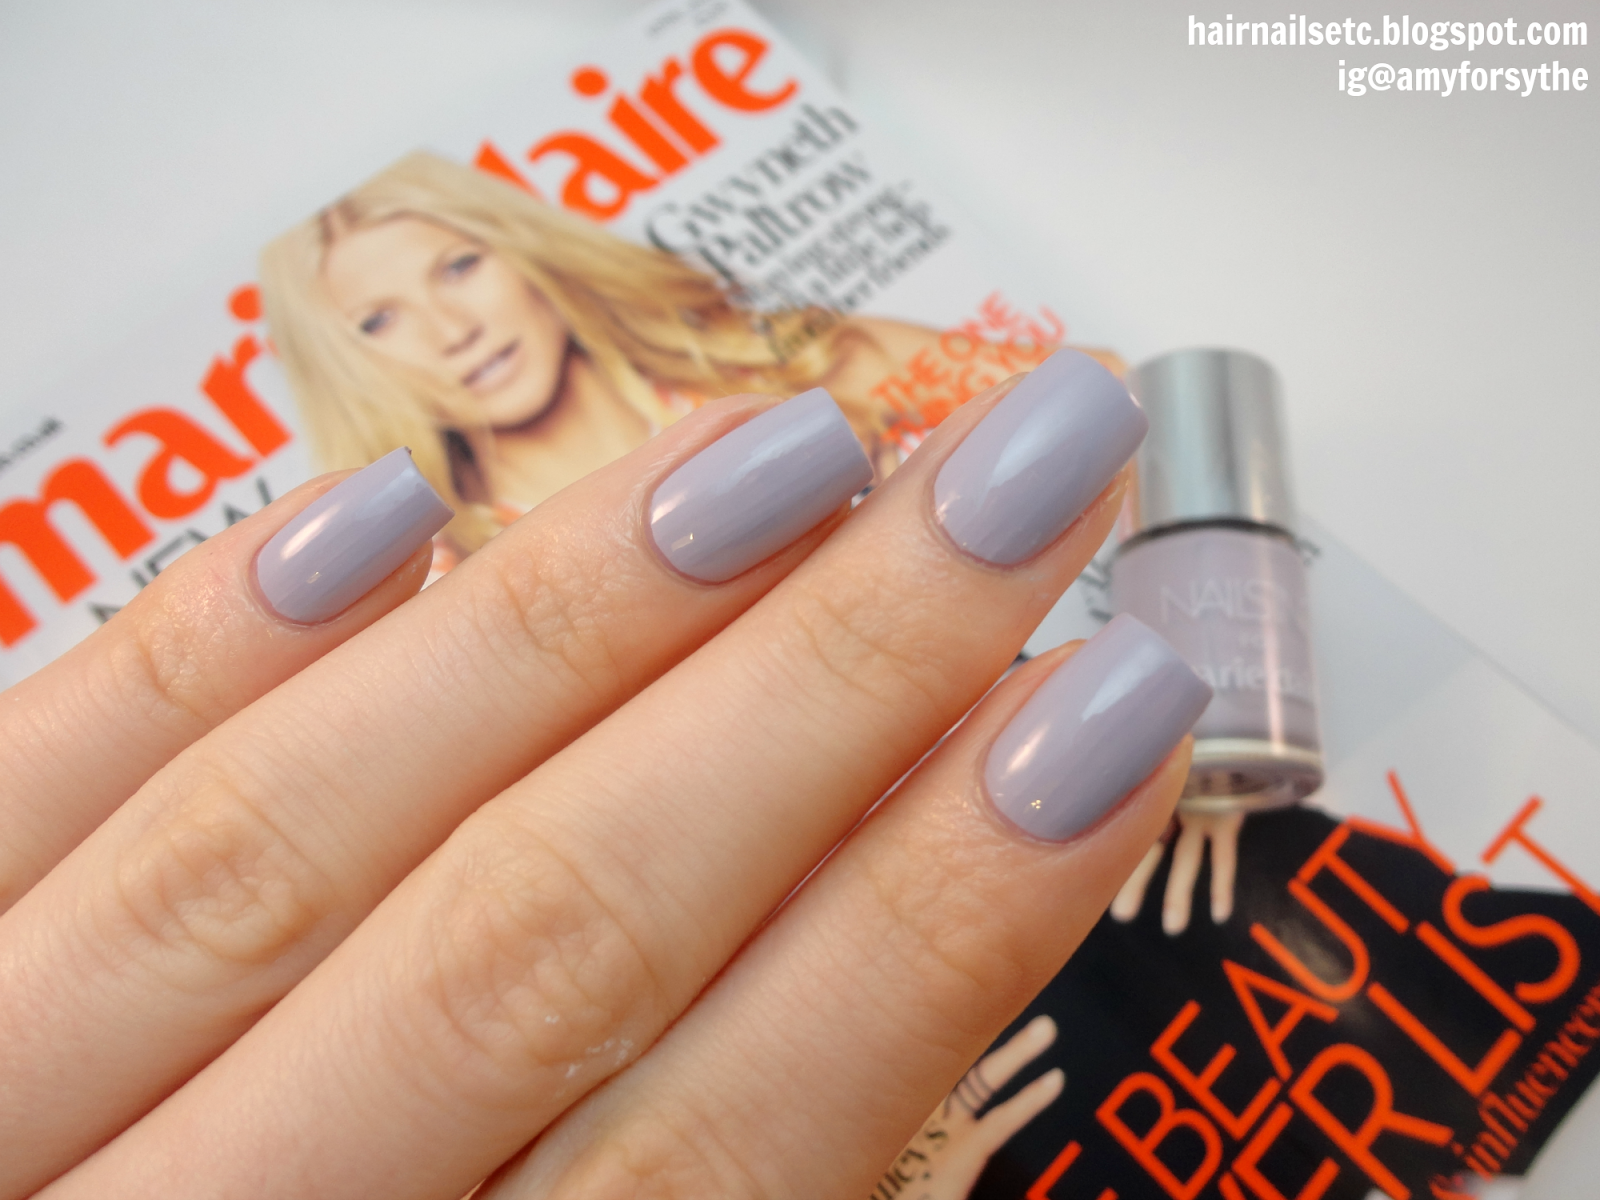 Swatches and Review of the Free Nails Inc 'Fashion' Lilac Nail Polish with Marie Claire April 2015 Magazine - hairnailsetc.blogspot.co.uk / ig@amyforsythe